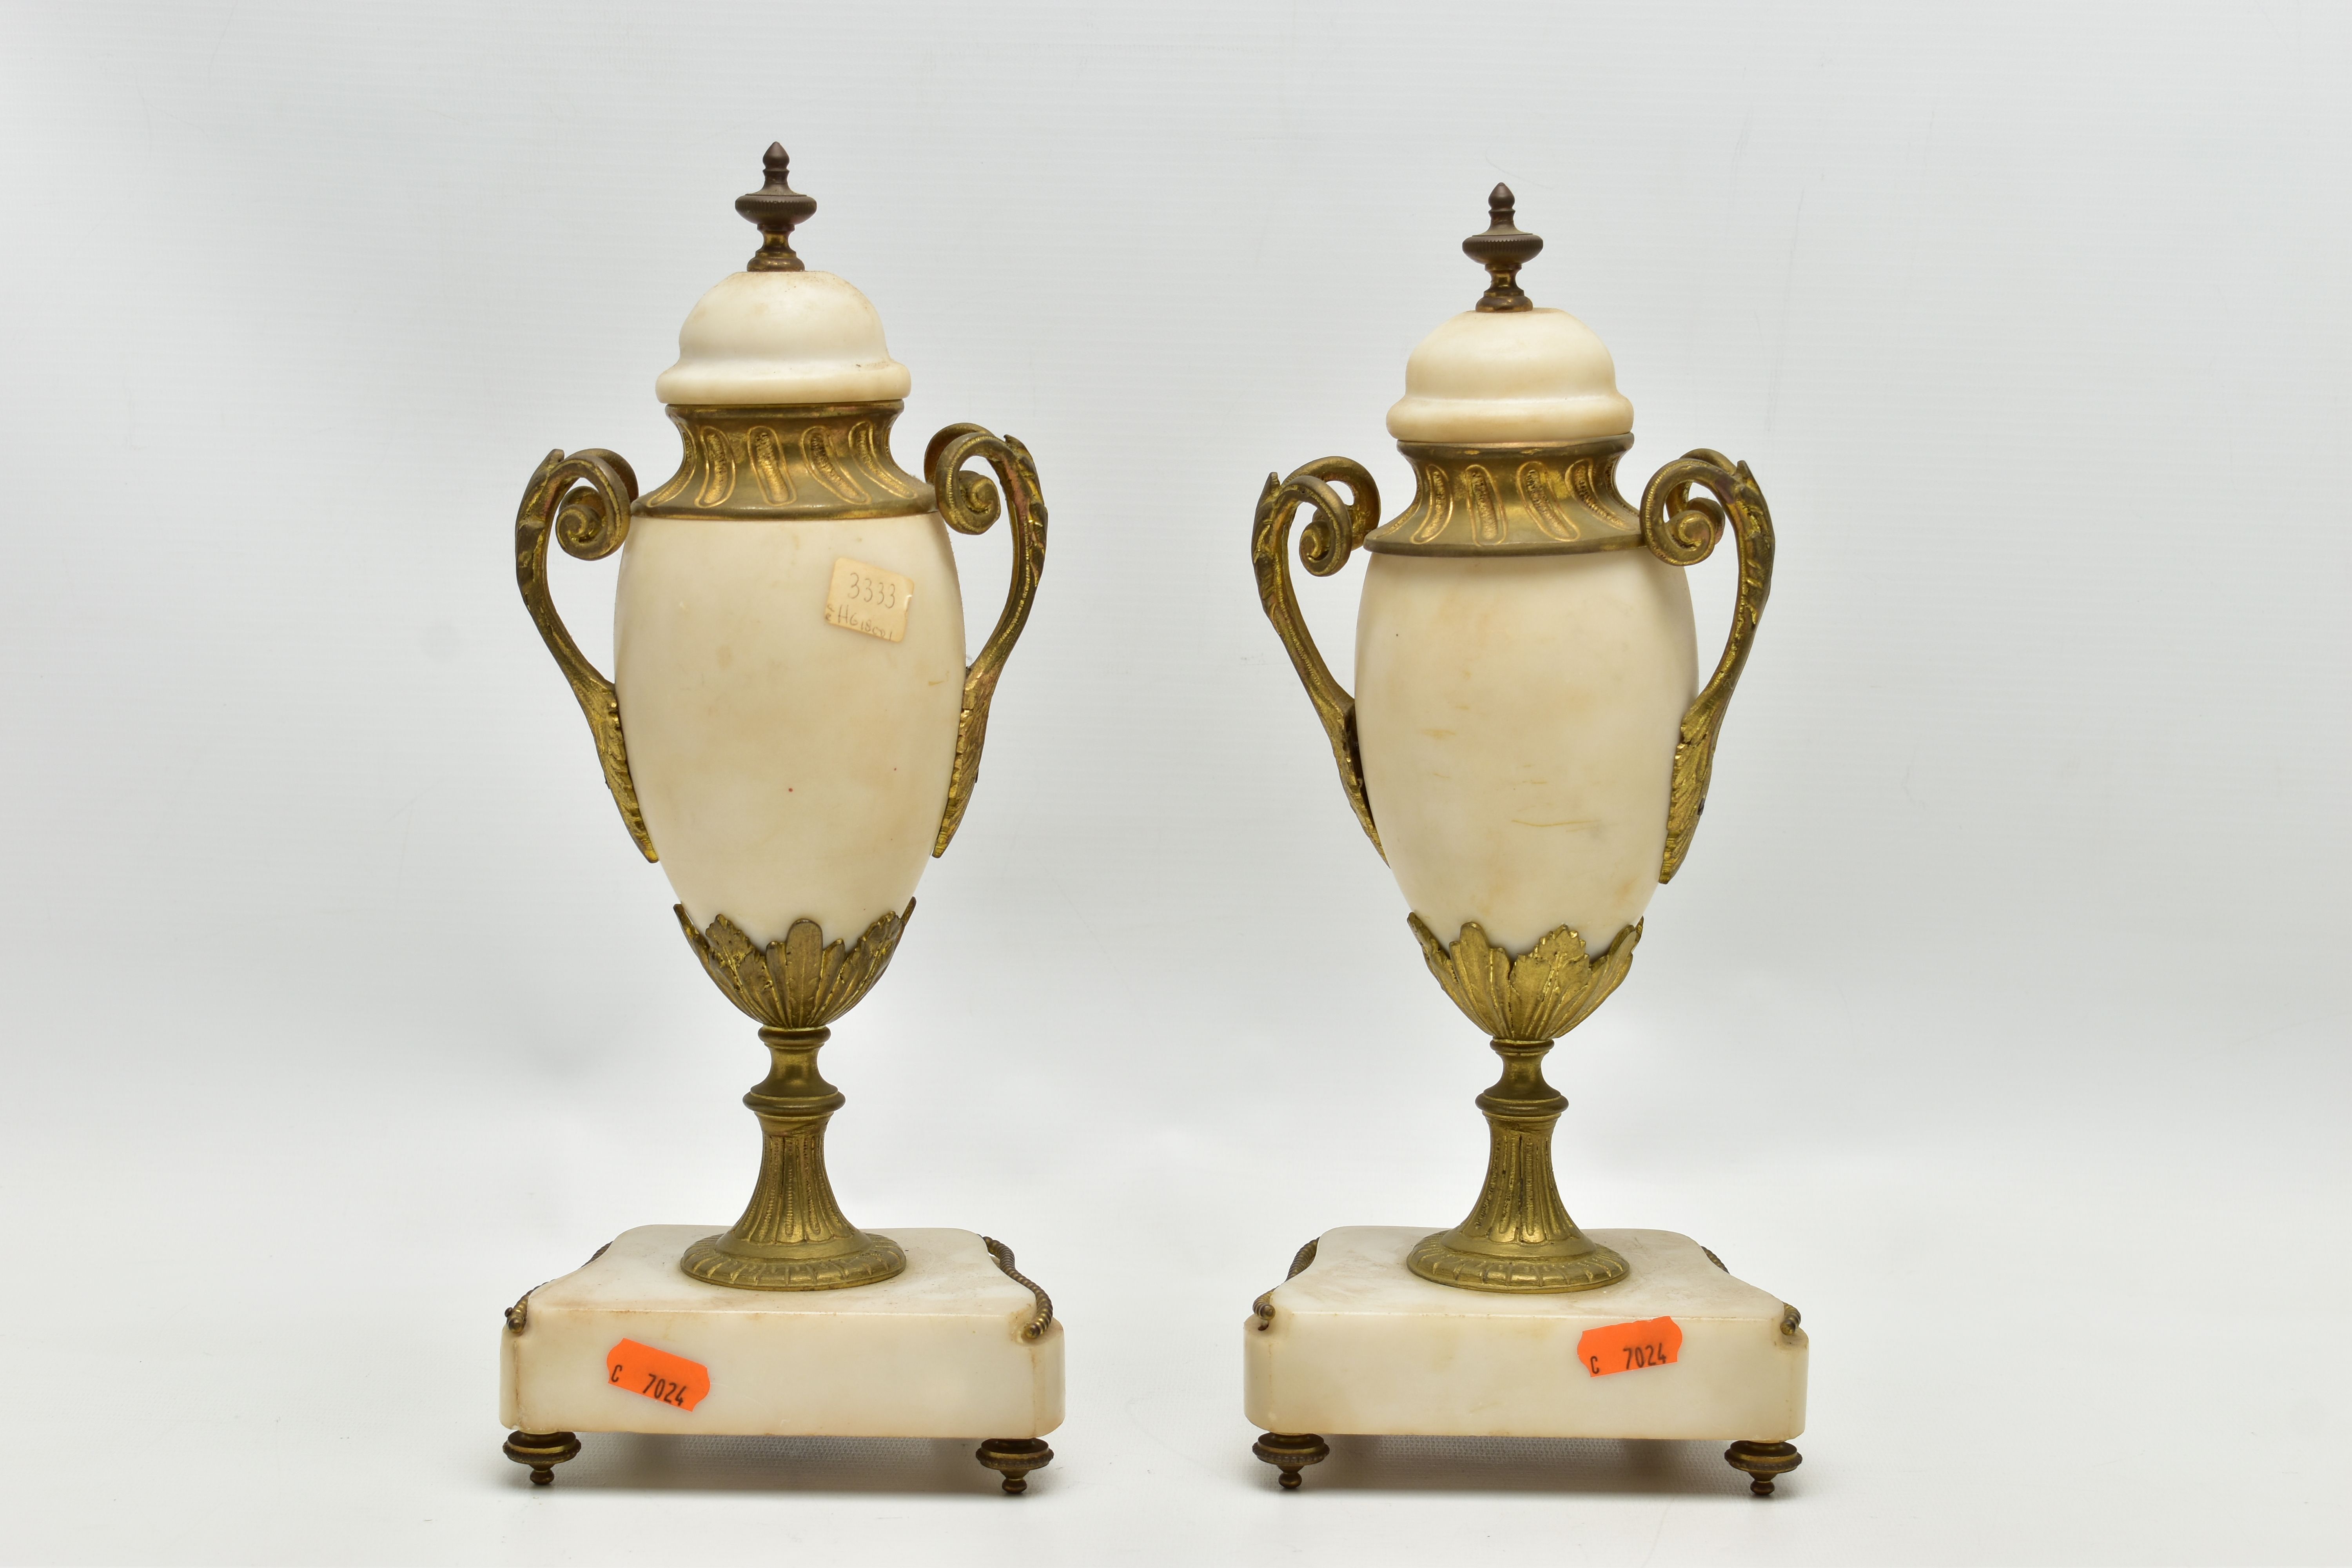 A LATE 19TH CENTURY FRENCH WHITE MARBLE AND GILT METAL CLOCK GARNITURE, the clock with urn - Image 16 of 18